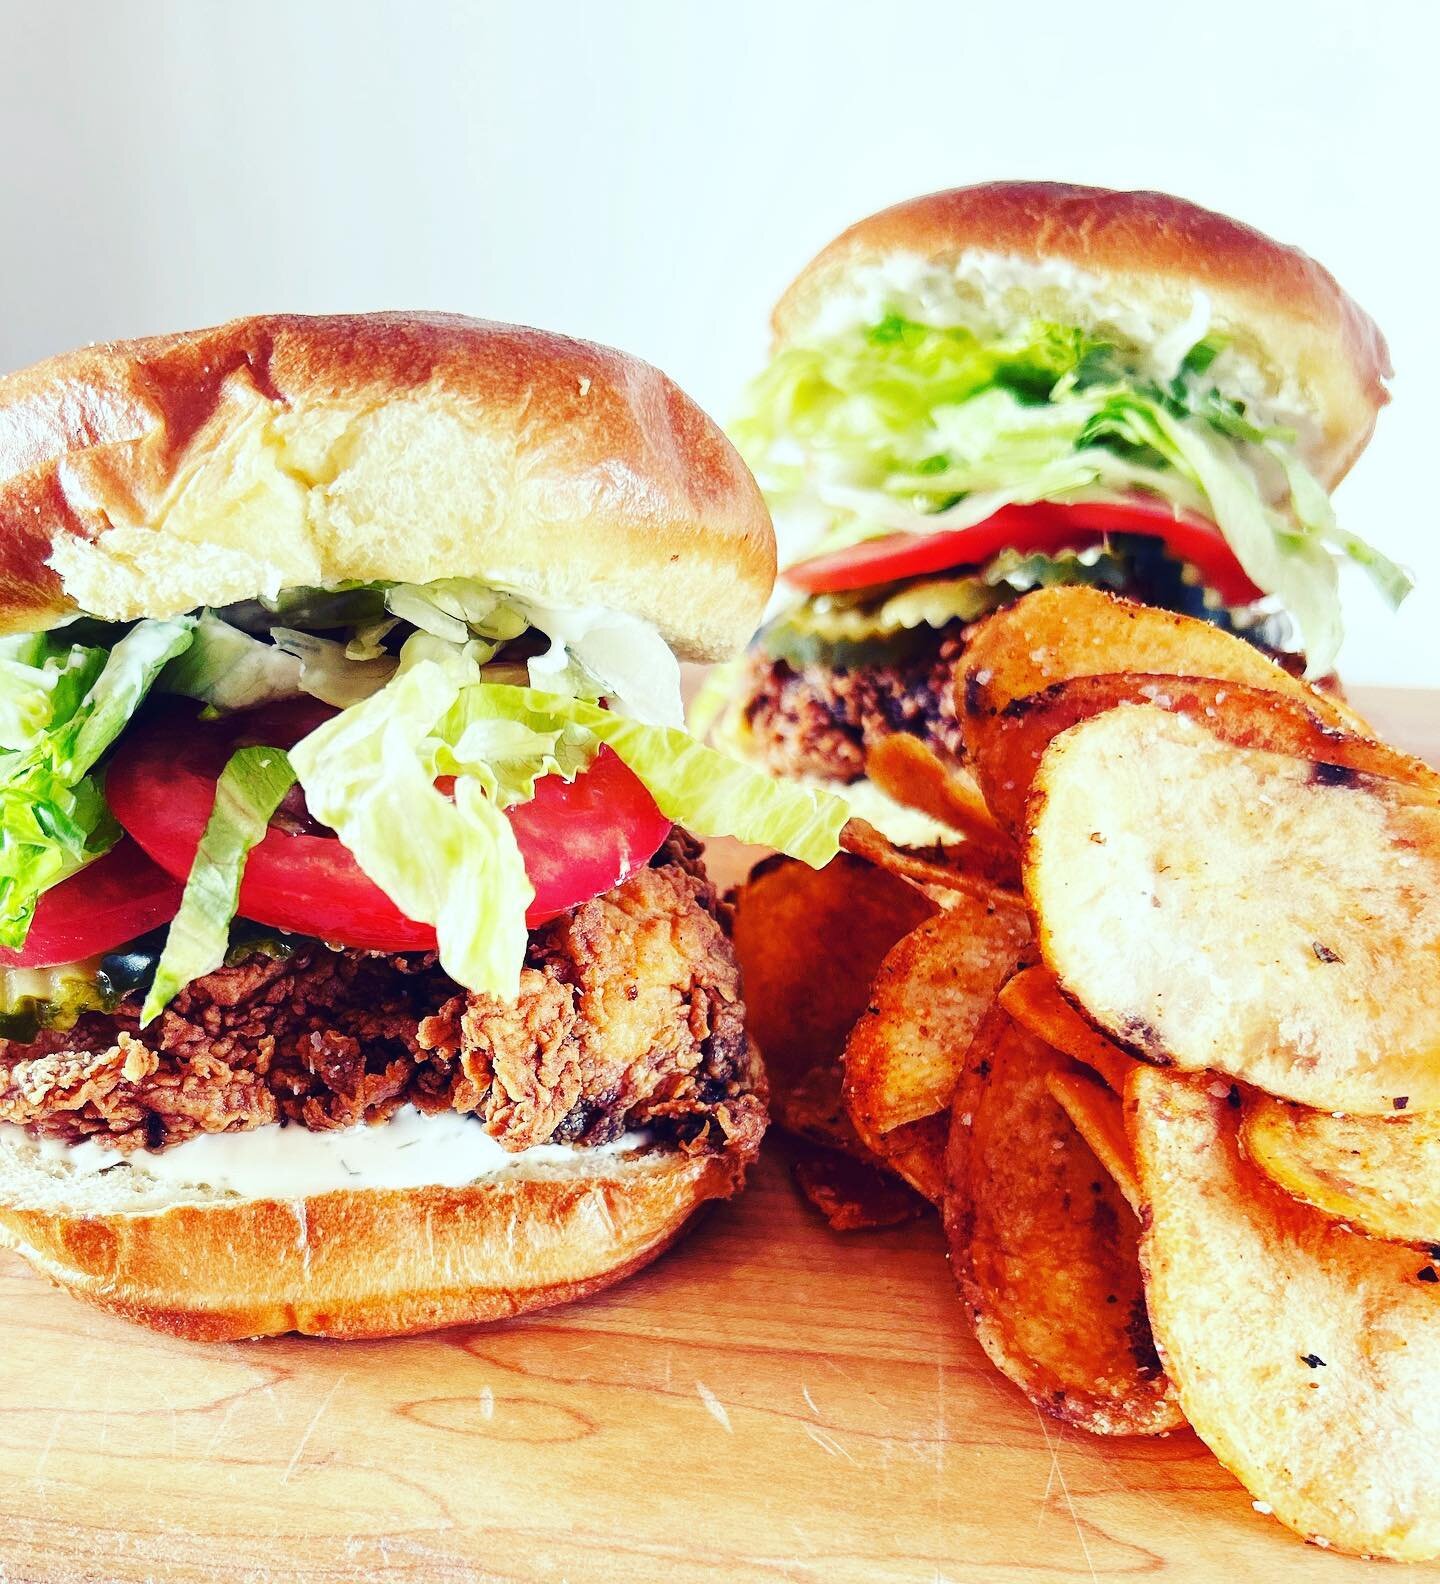 ✨SATURDAY CHICKEN FRY✨

If you missed last Saturdays fried chicken special&hellip;don&rsquo;t fret!!!! We have it again today!!!!
*Buttermilk Fried Chicken
*Homemade Ranch
*Lettuce
*Tomato
*Pickles
*Toasted Brioche
Come and get it while supplies last